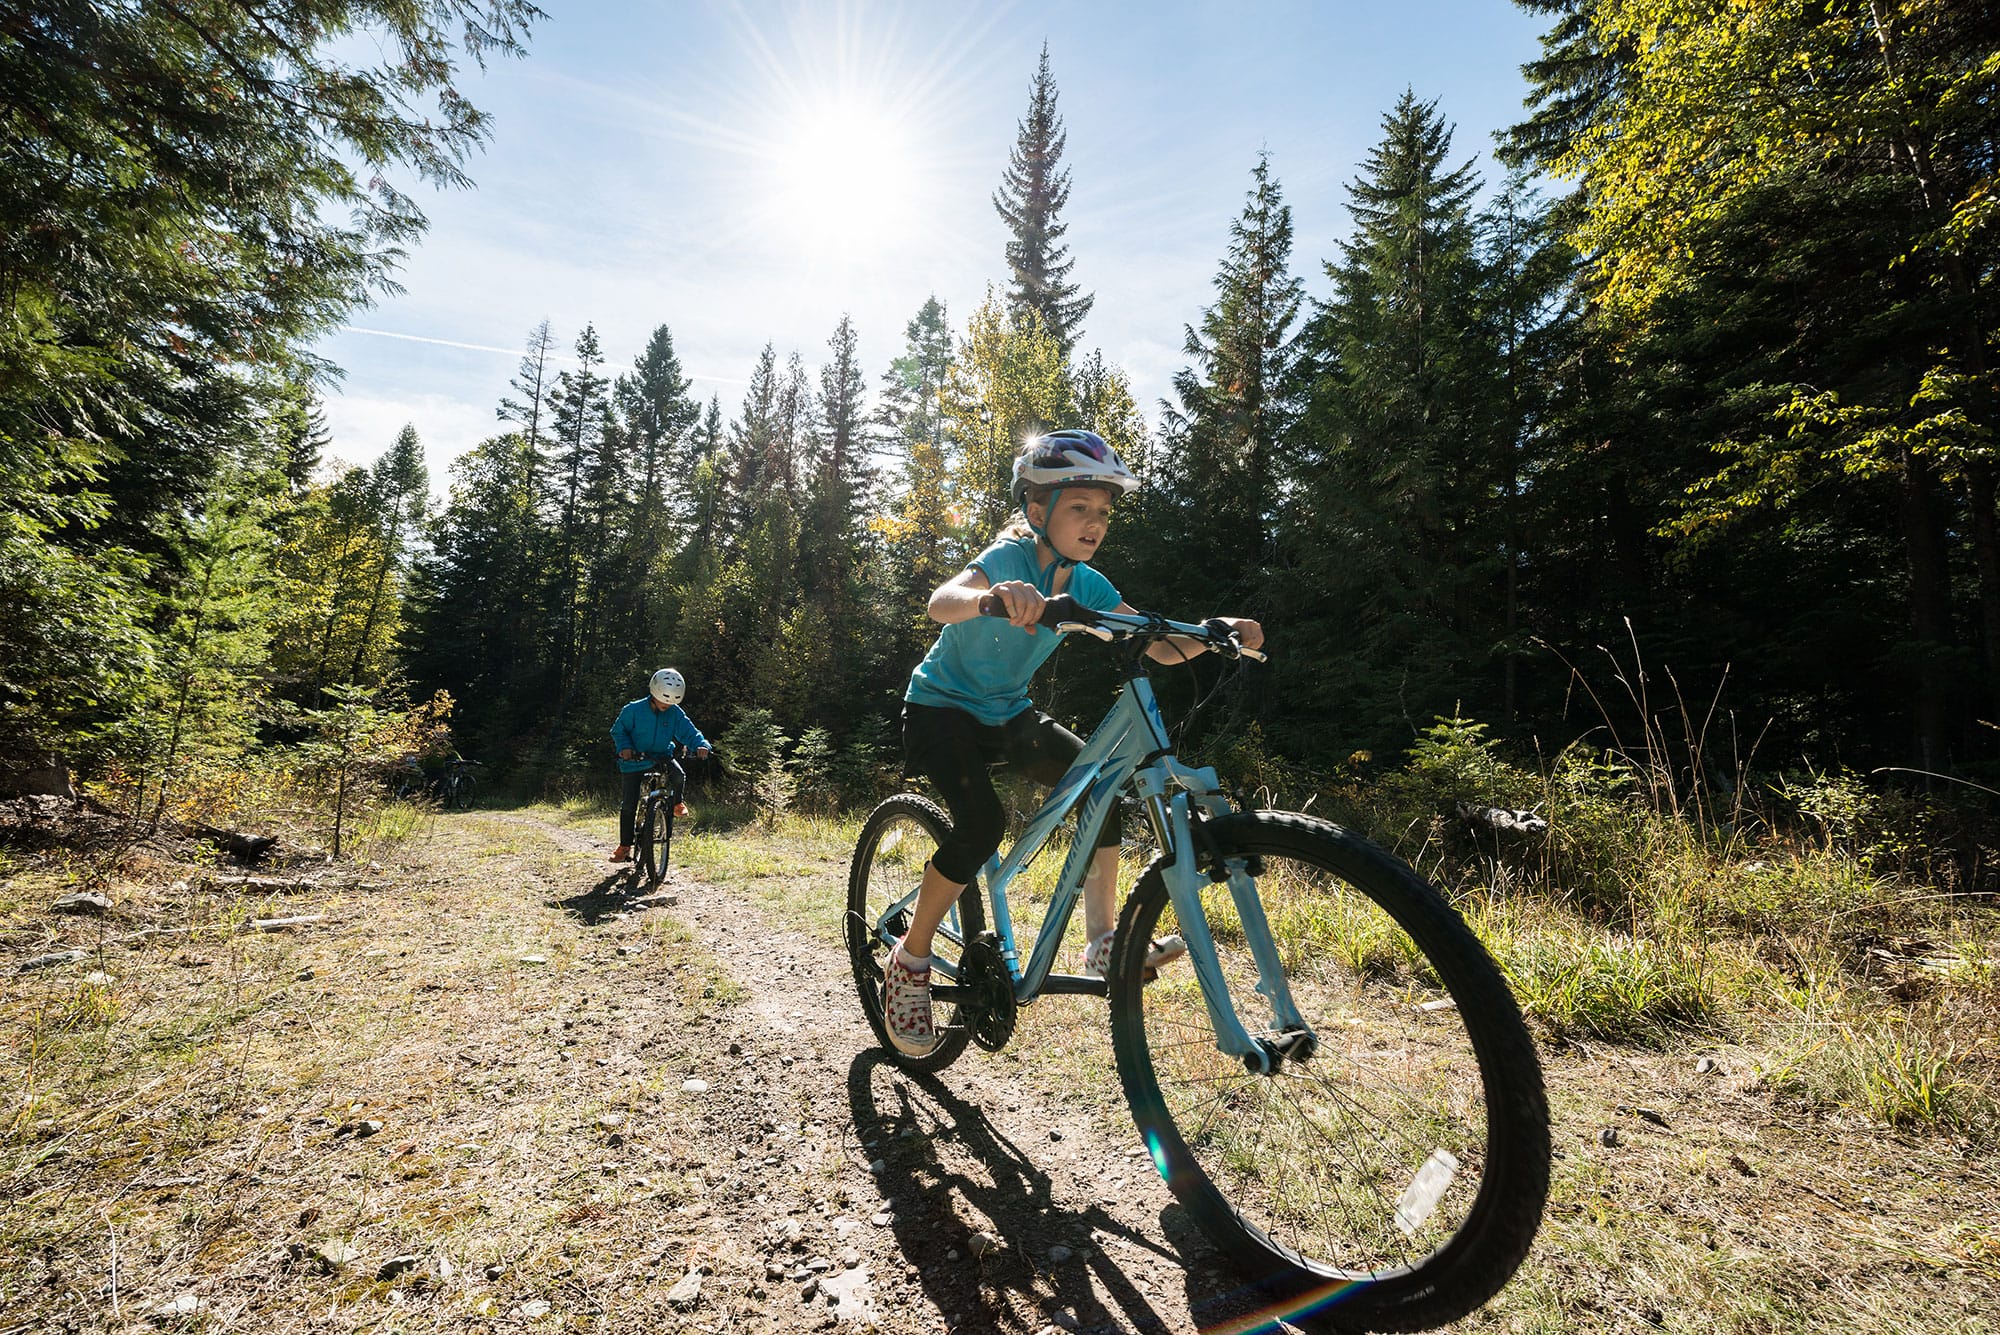 A boy riding a blue mountain bike in the woods.